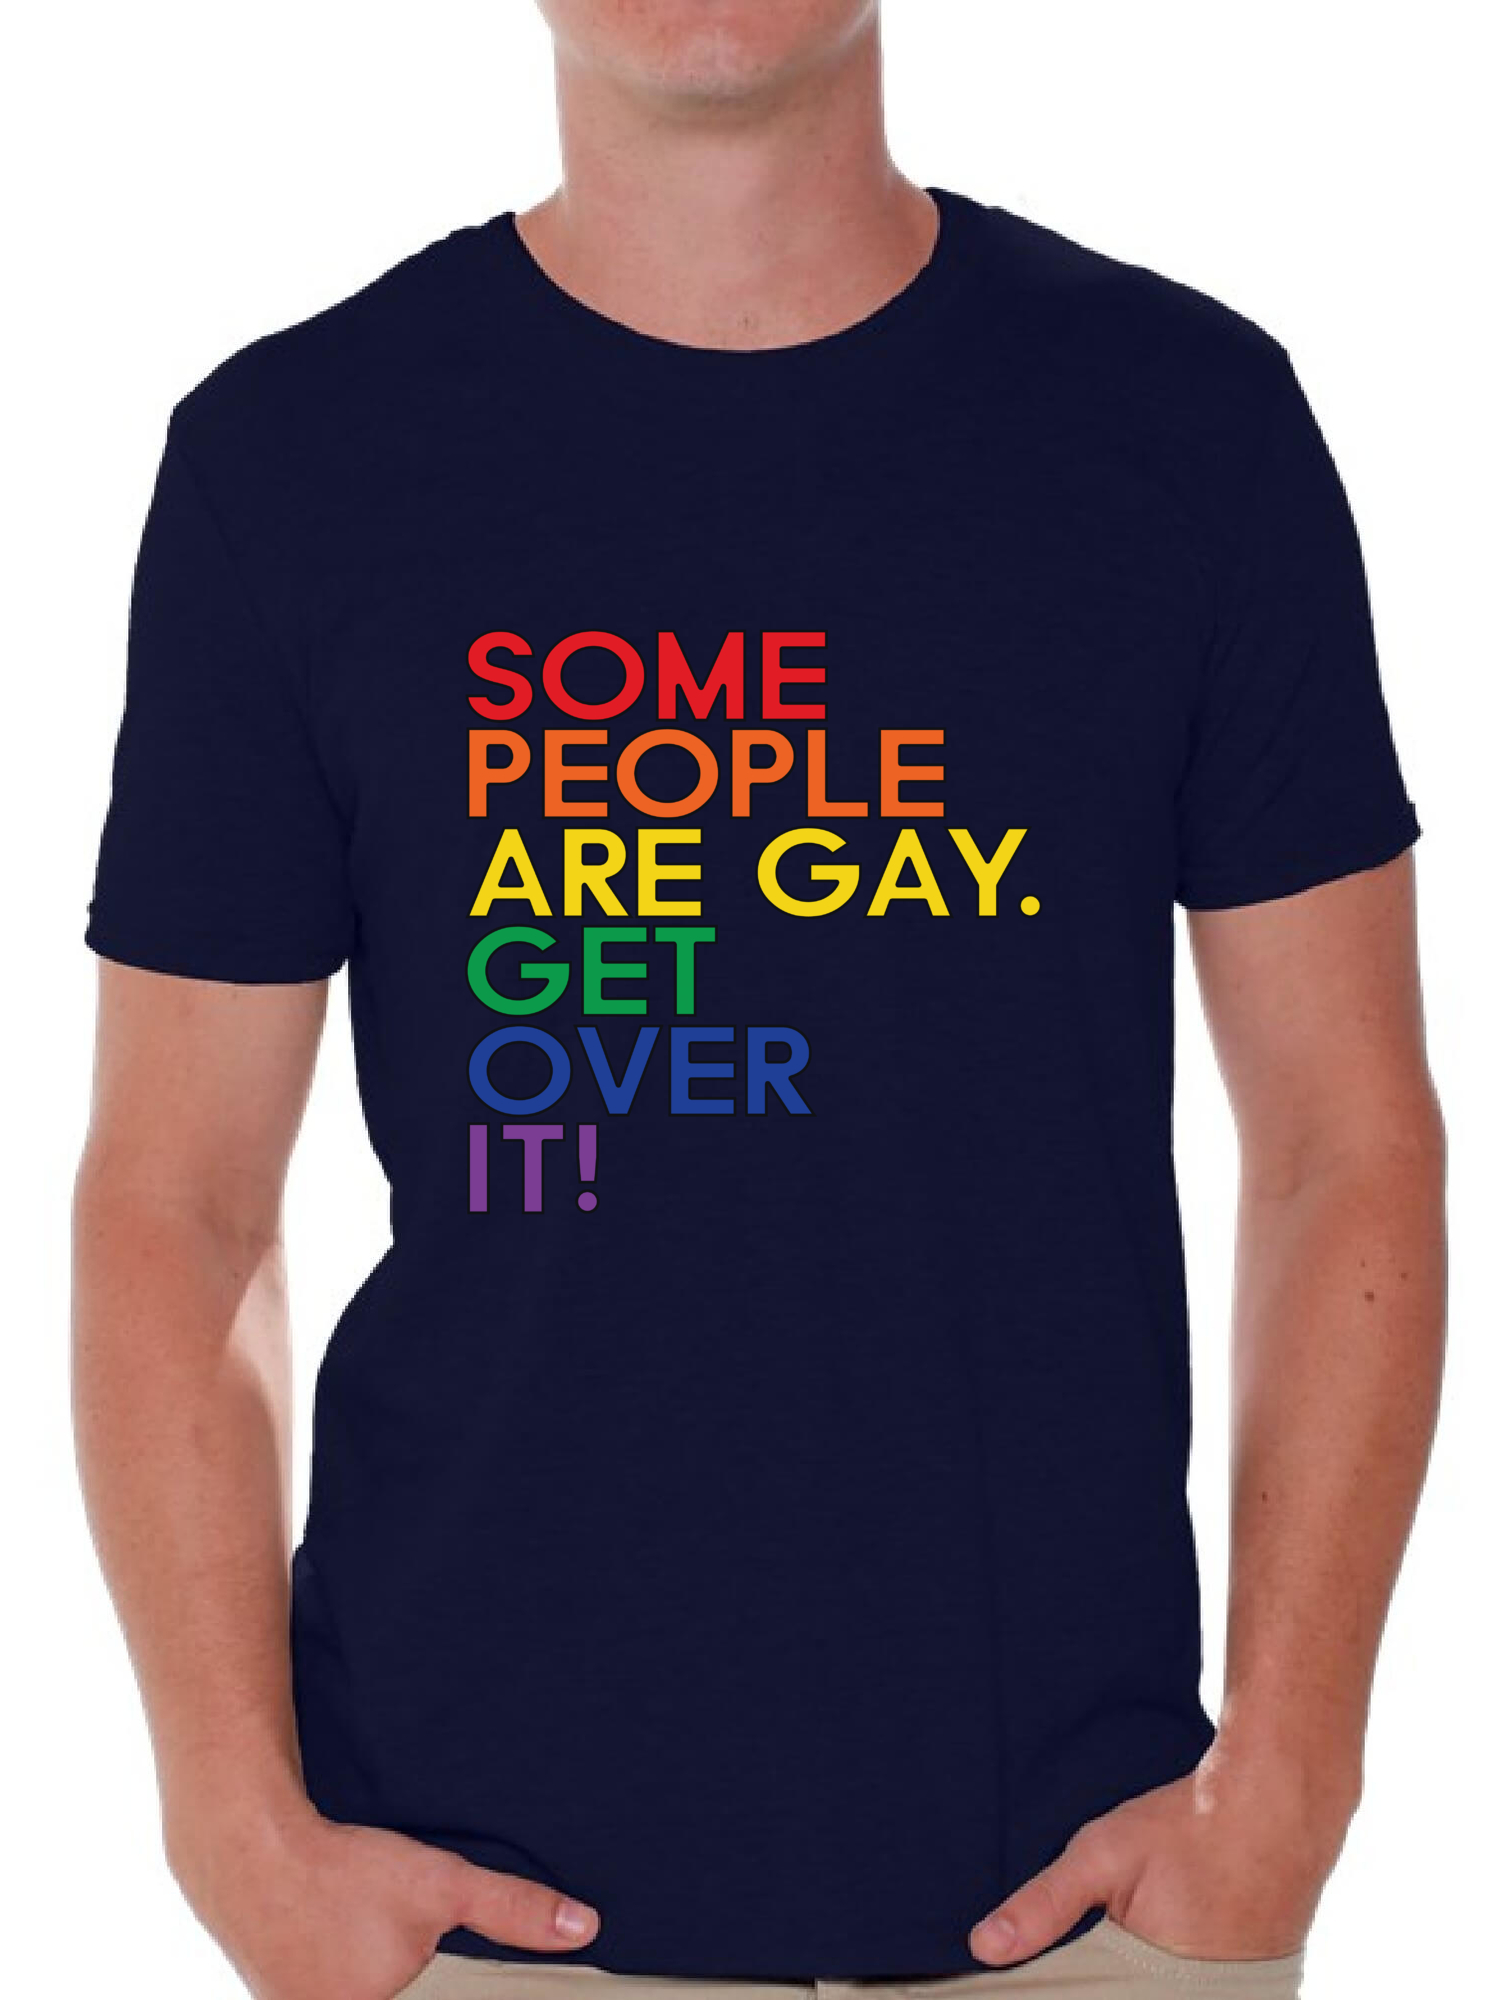 Awkward Styles Some People are Gay Get Over It T Shirt Gay Pride Flag Tshirt for Him Gay Mens Shirt Gay Flag T Shirt Gay T Shirt Mens Tshirt for Gay Boyfriend Rainbow Gay T Shirt Gay Tshirt for Him - image 1 of 4